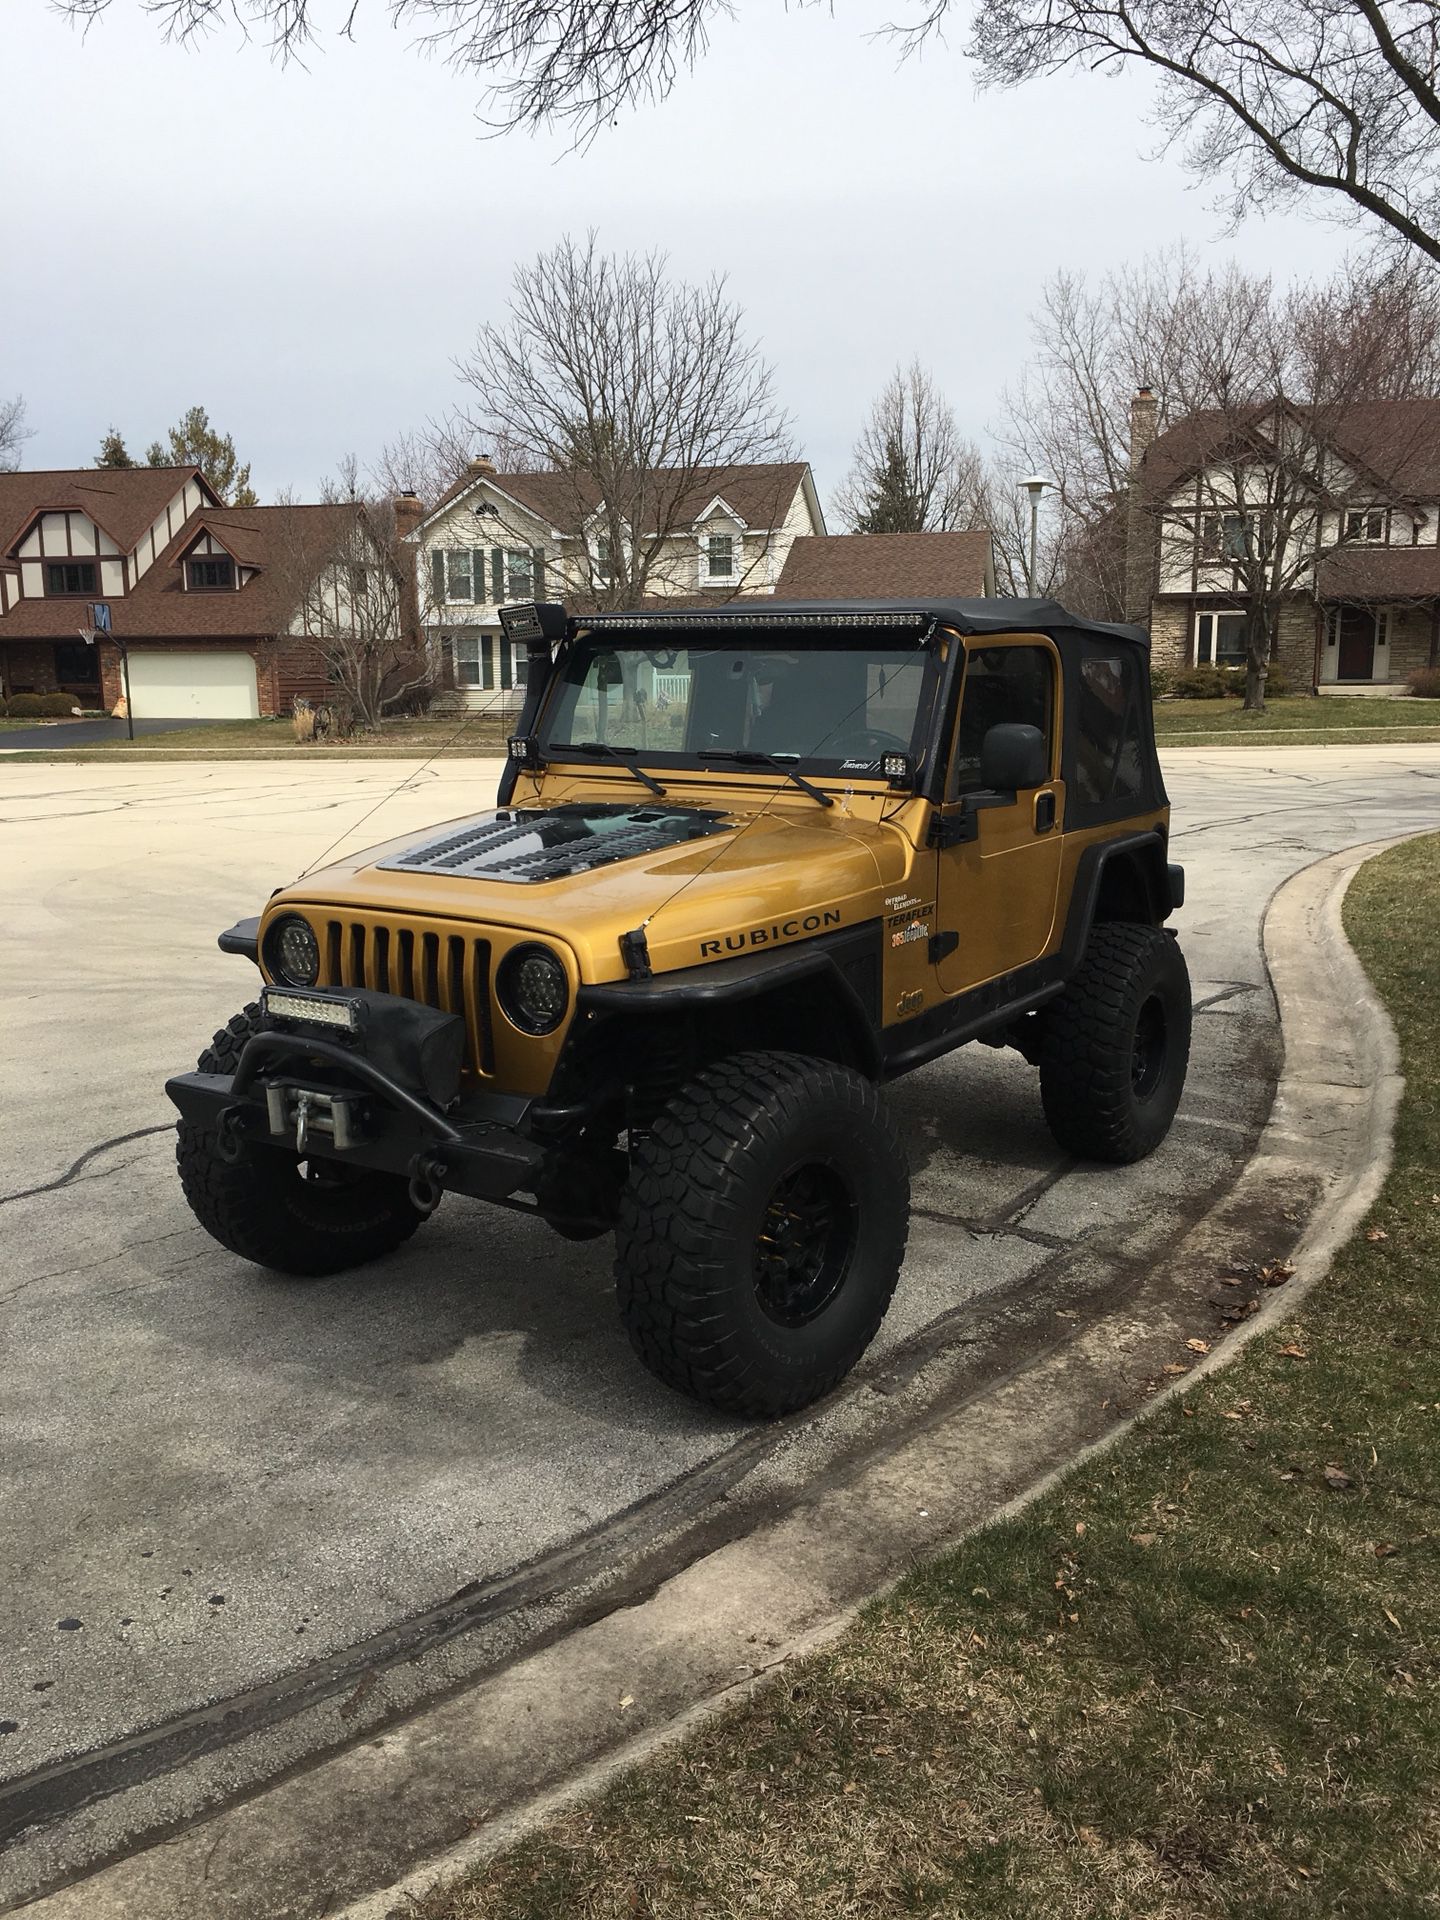 2003 Jeep Wrangler for Sale in Naperville, IL - OfferUp